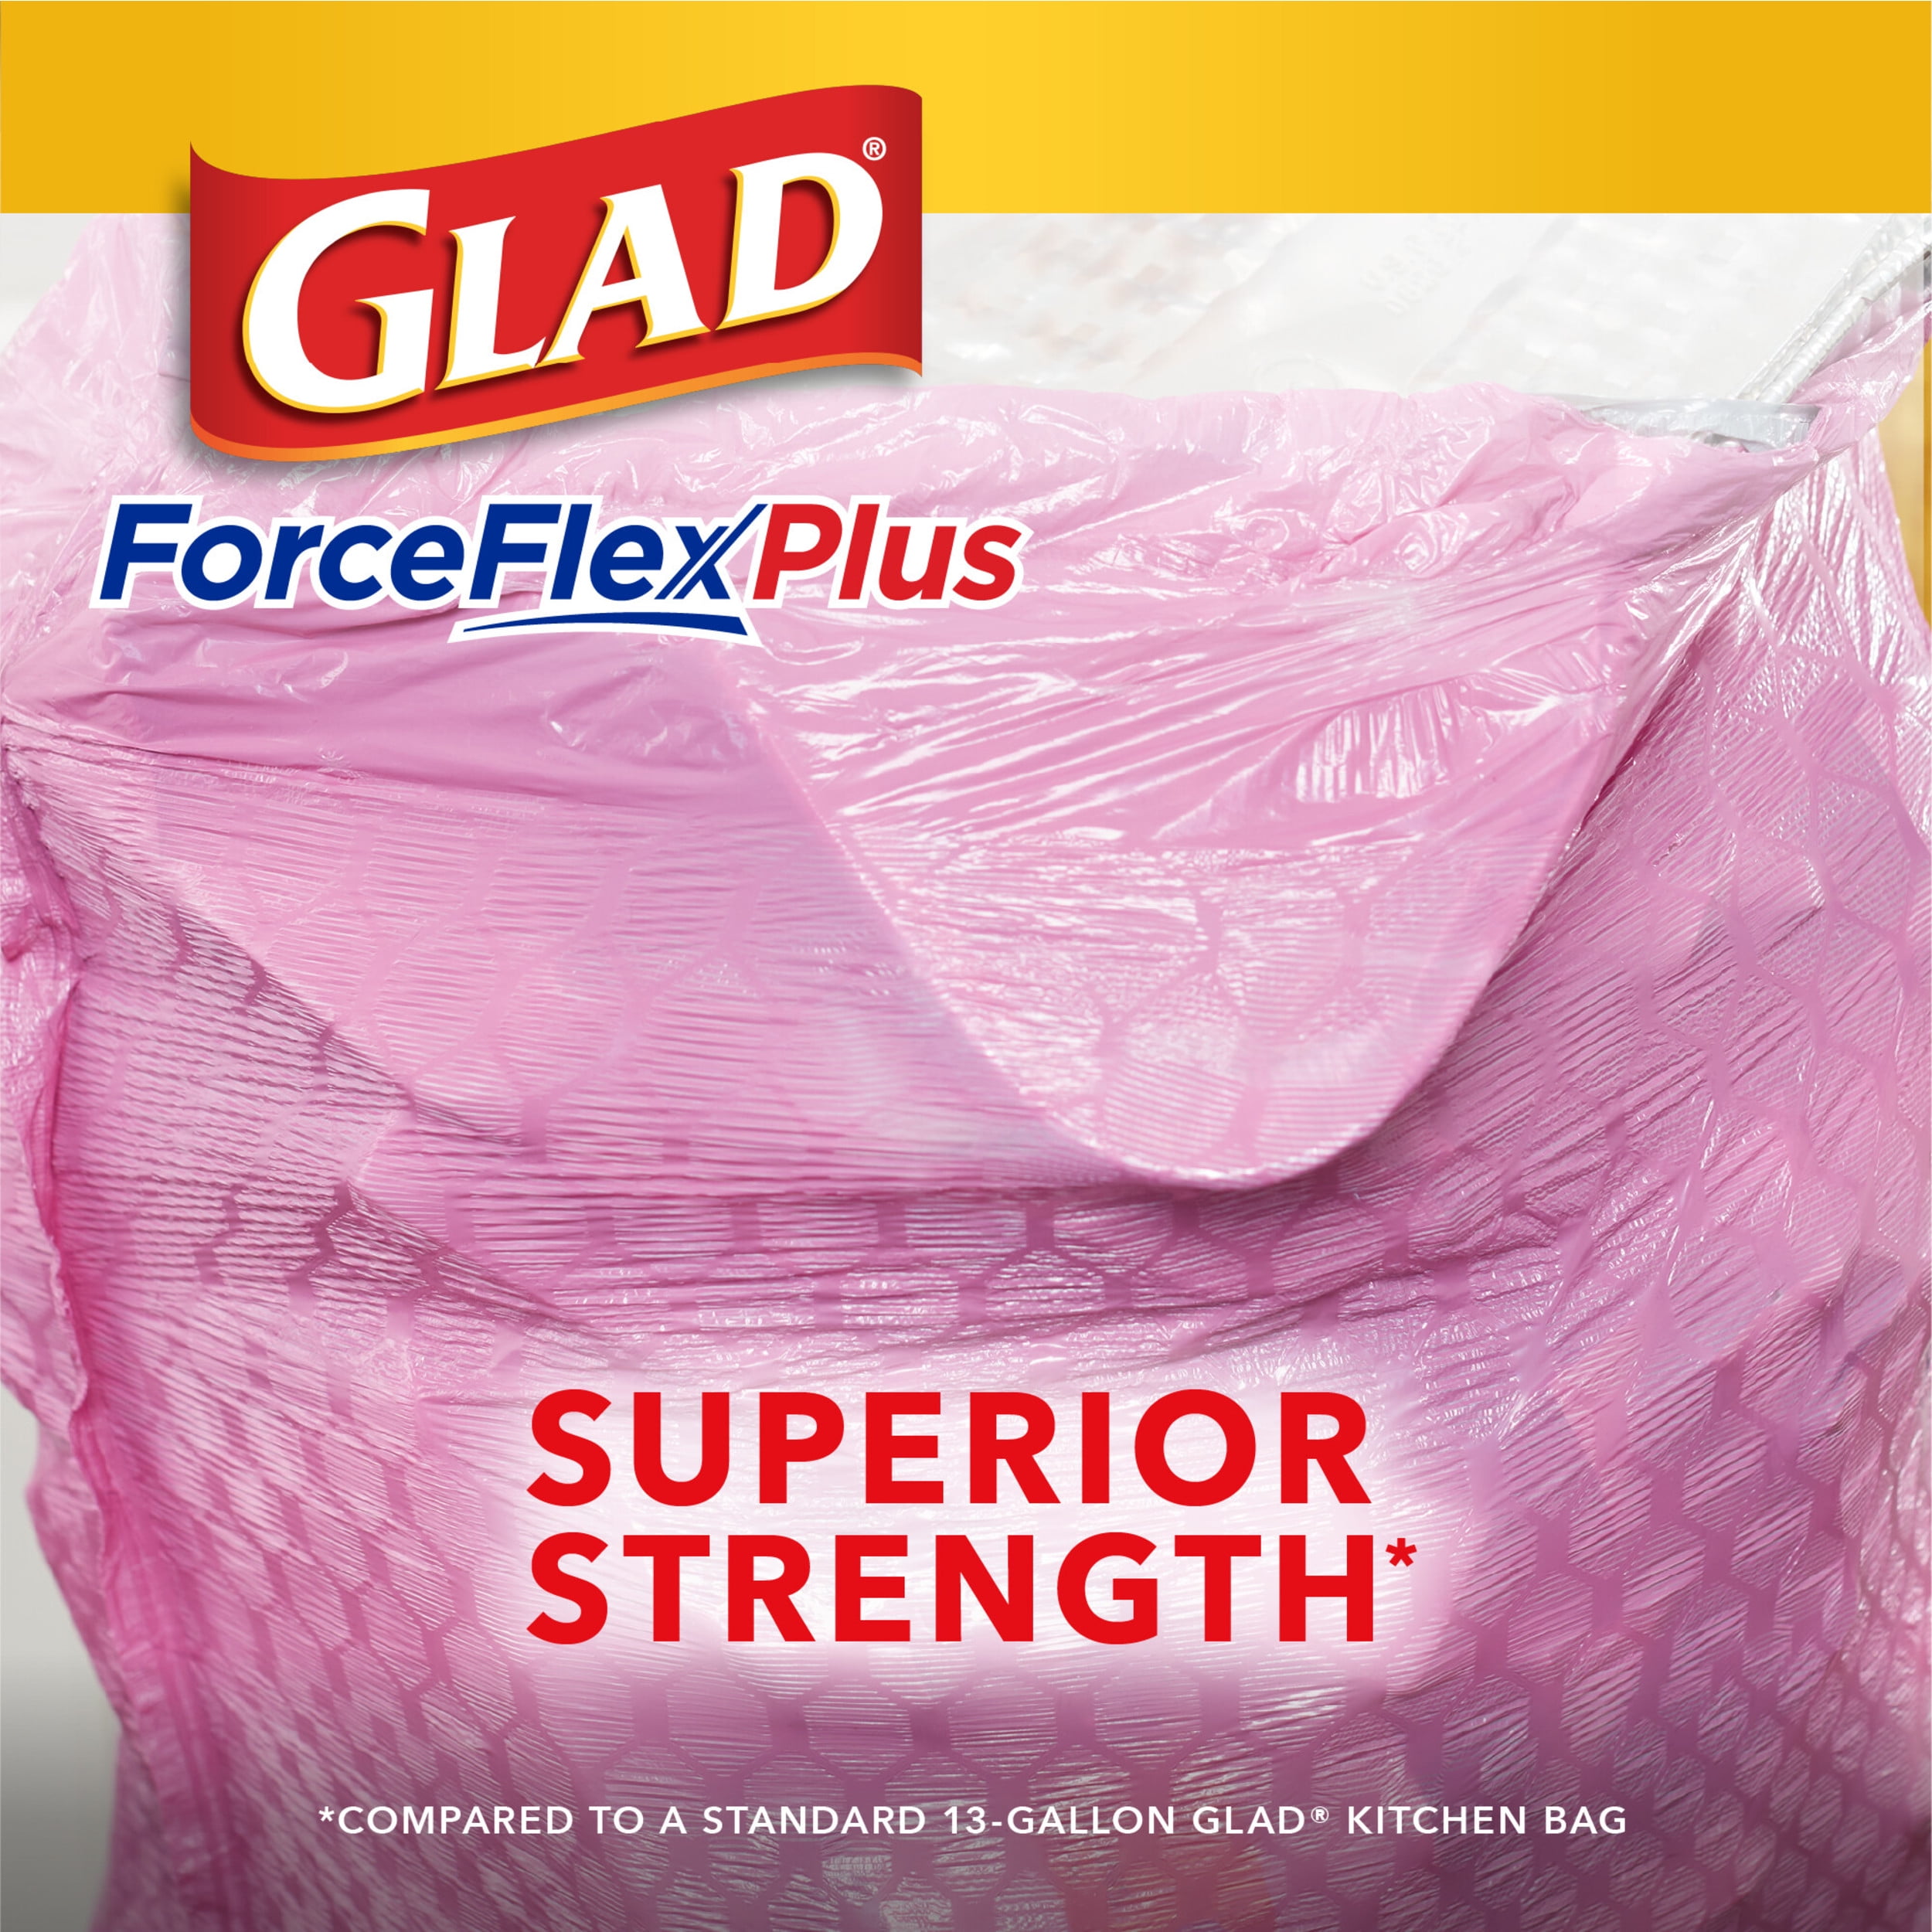 YaFex-goods 20 Gallon Trash Bag 15 Count Bulk Heavy Duty Garbage Bags Home  Kitchen - Pink 